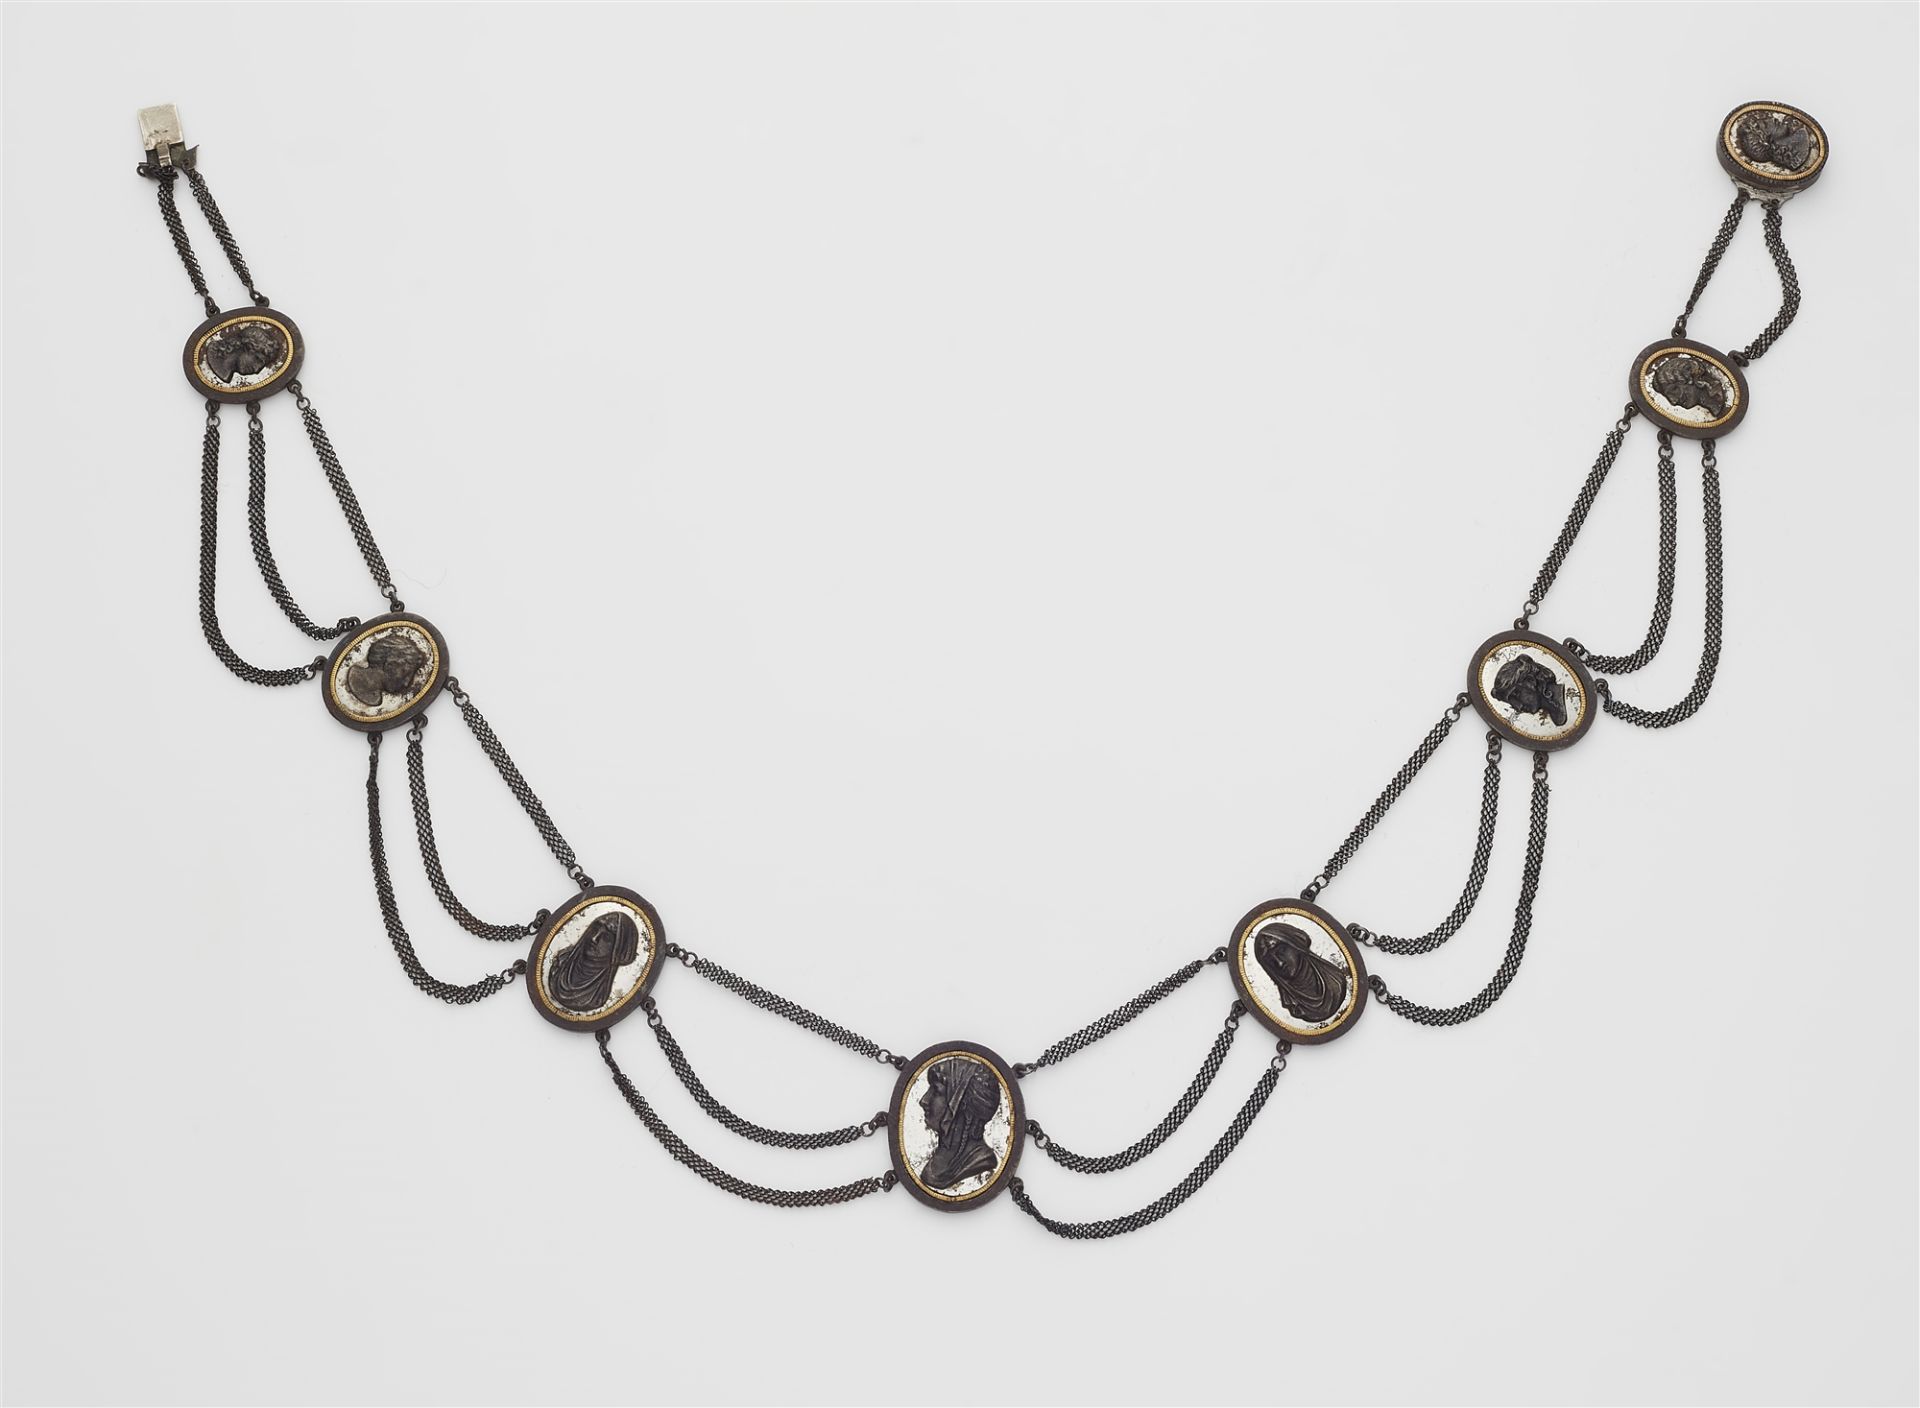 A cast iron, steel and gold cameo necklace